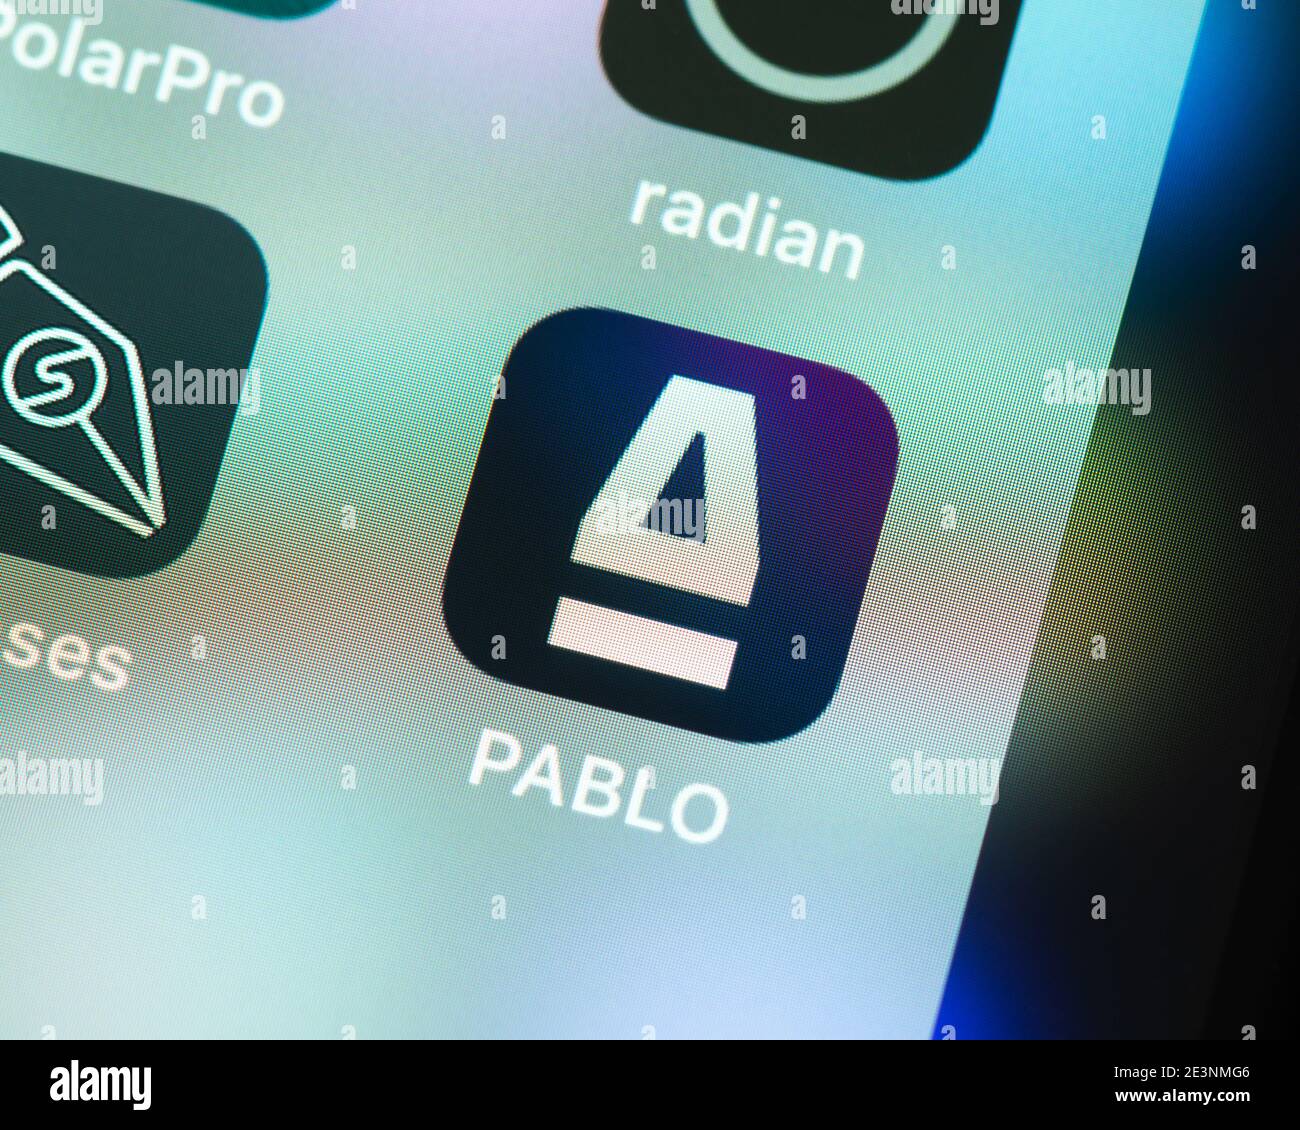 Pablo app icon on Apple iPhone screen. Pablo is a long exposure and light painting video app. The app is now discontinued. Stock Photo